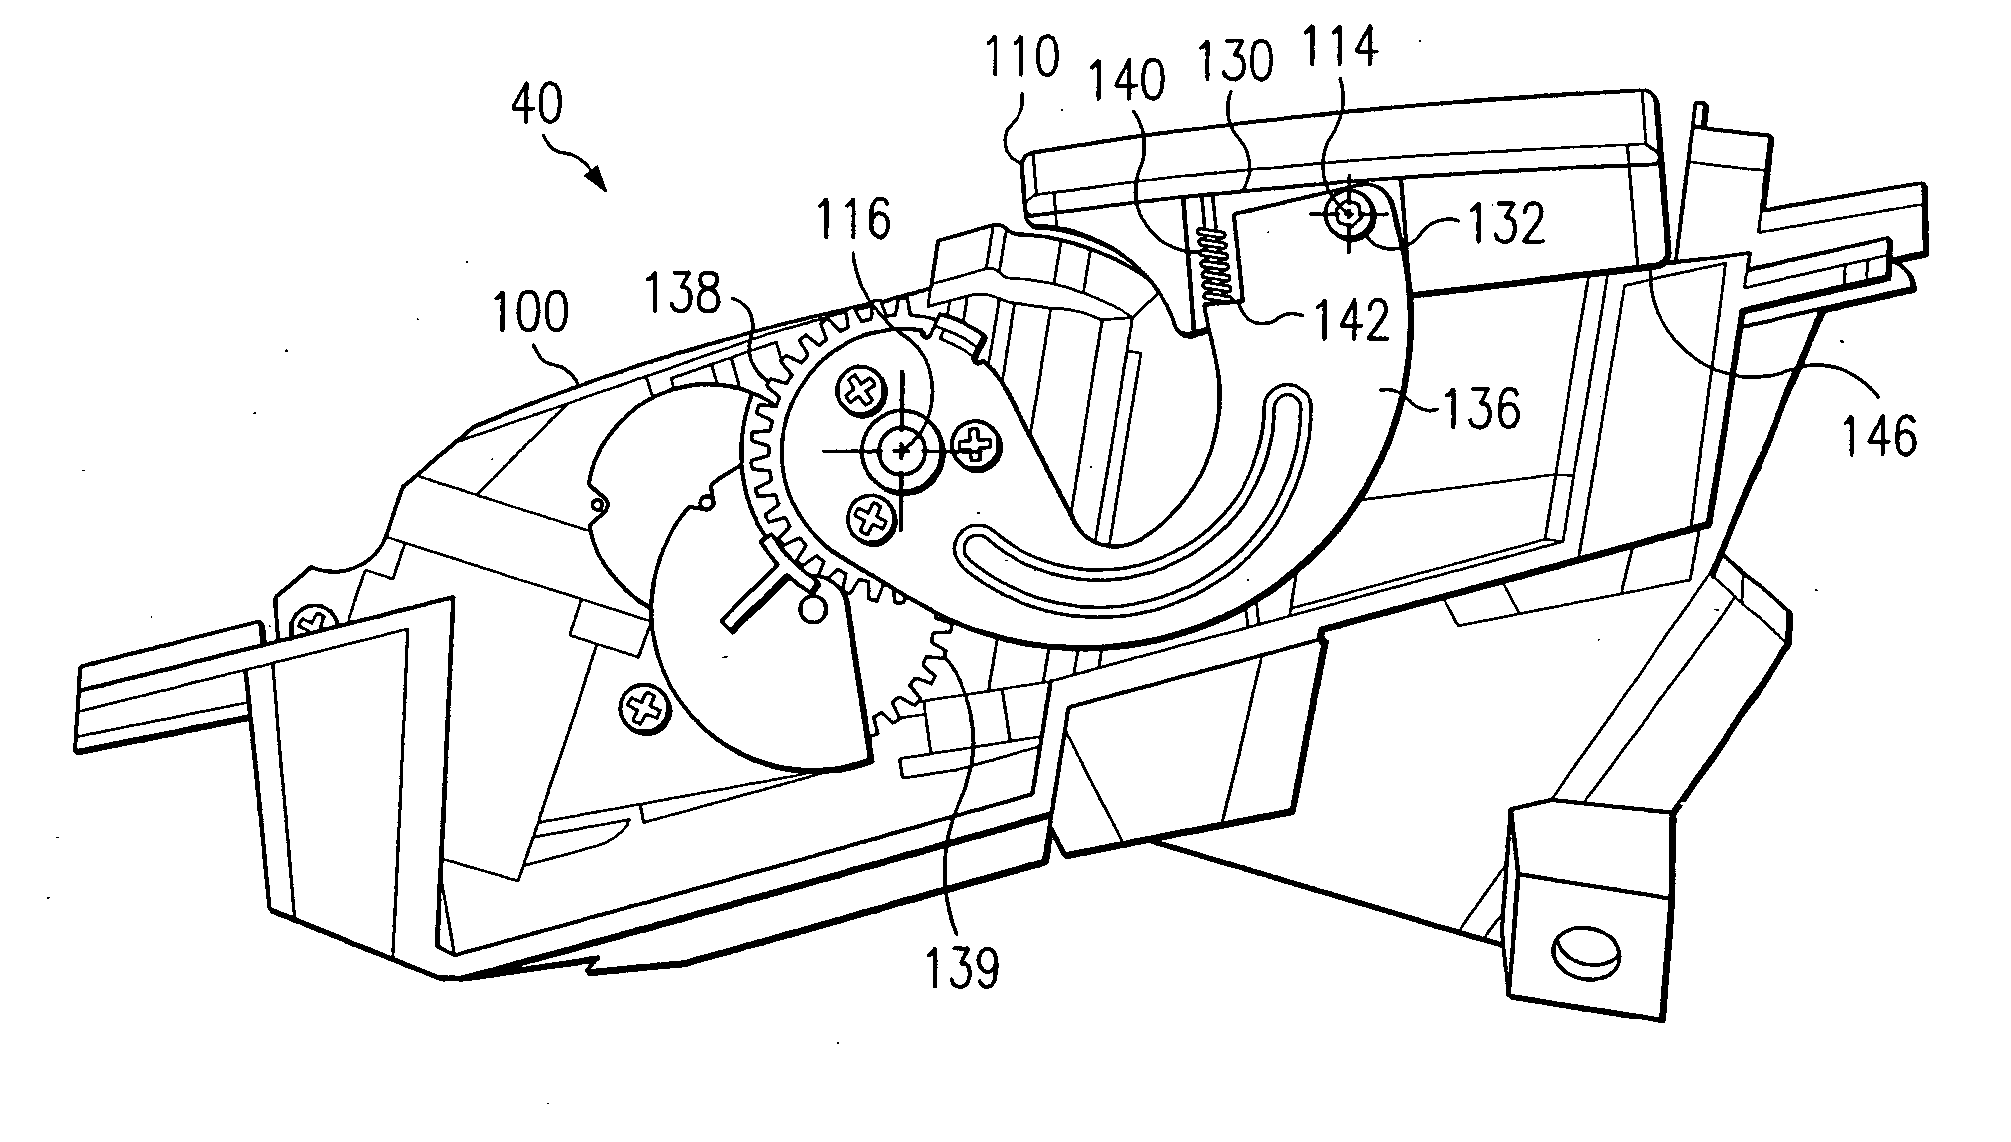 Method and system for deploying a mirror assembly from a recessed position